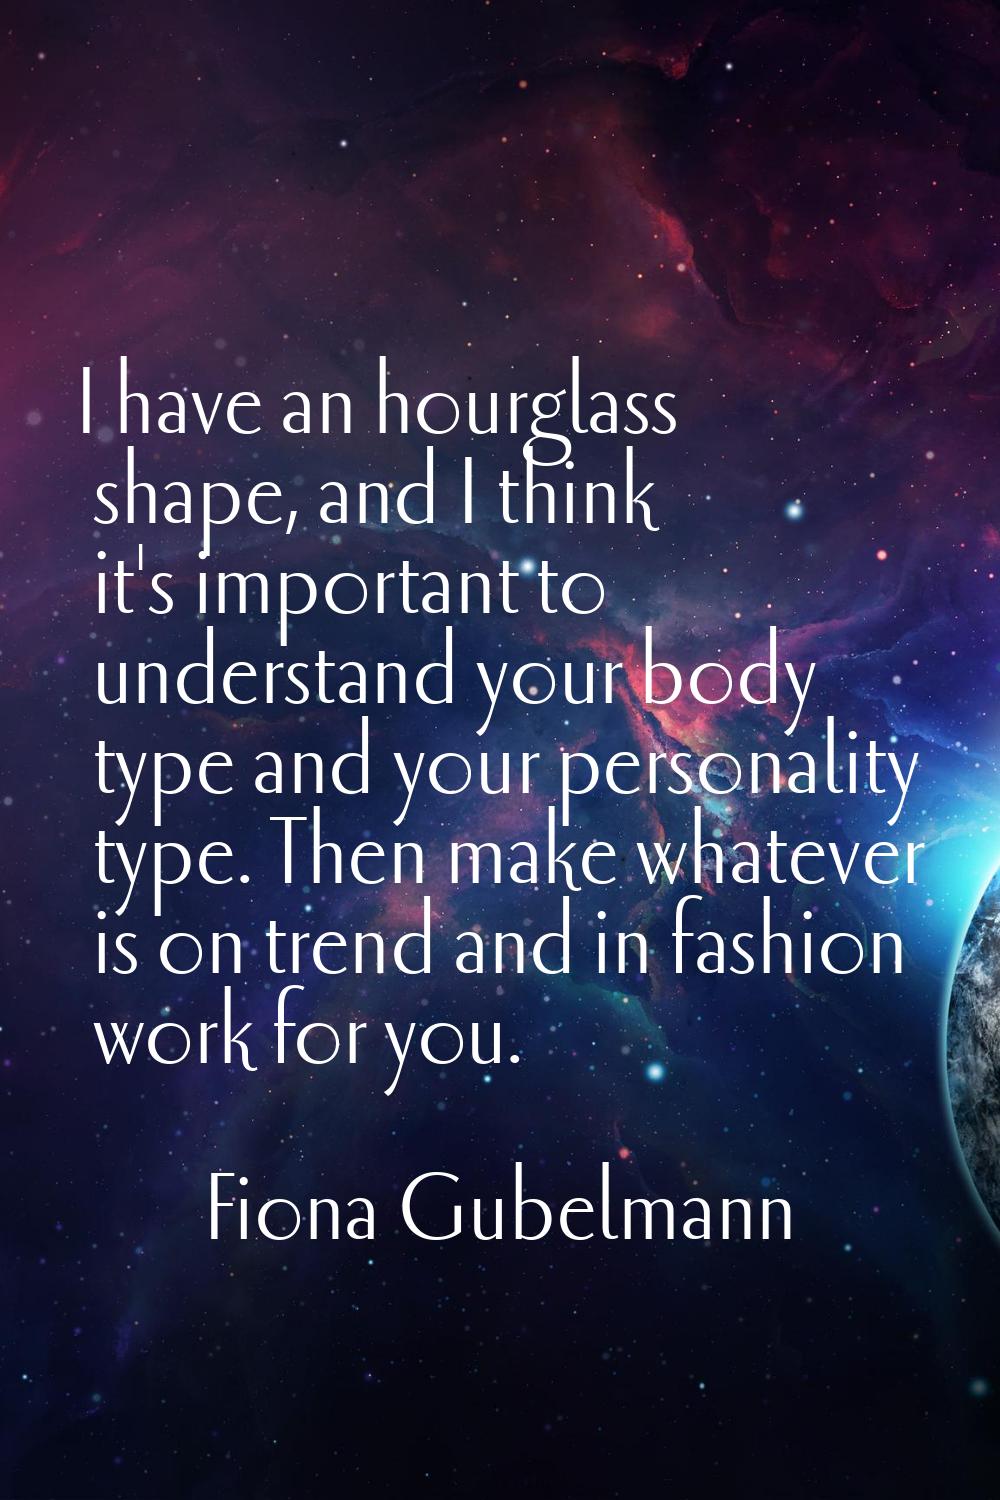 I have an hourglass shape, and I think it's important to understand your body type and your persona